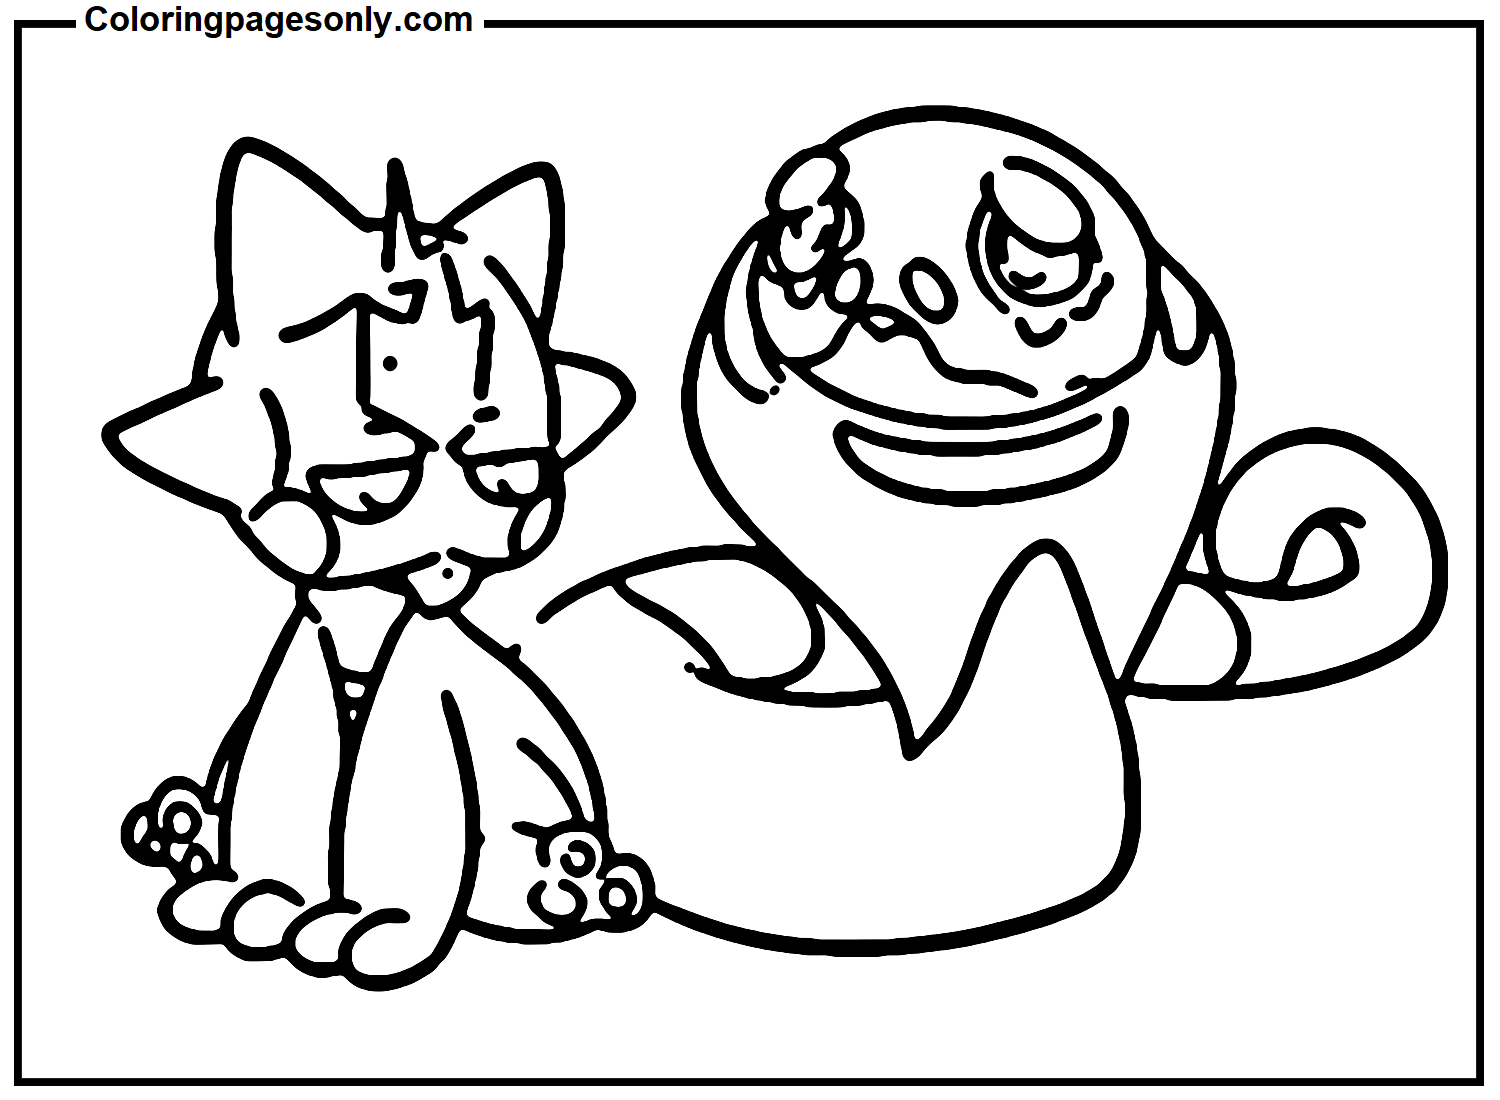 Toxel Pokemon coloring page - Download, Print or Color Online for Free